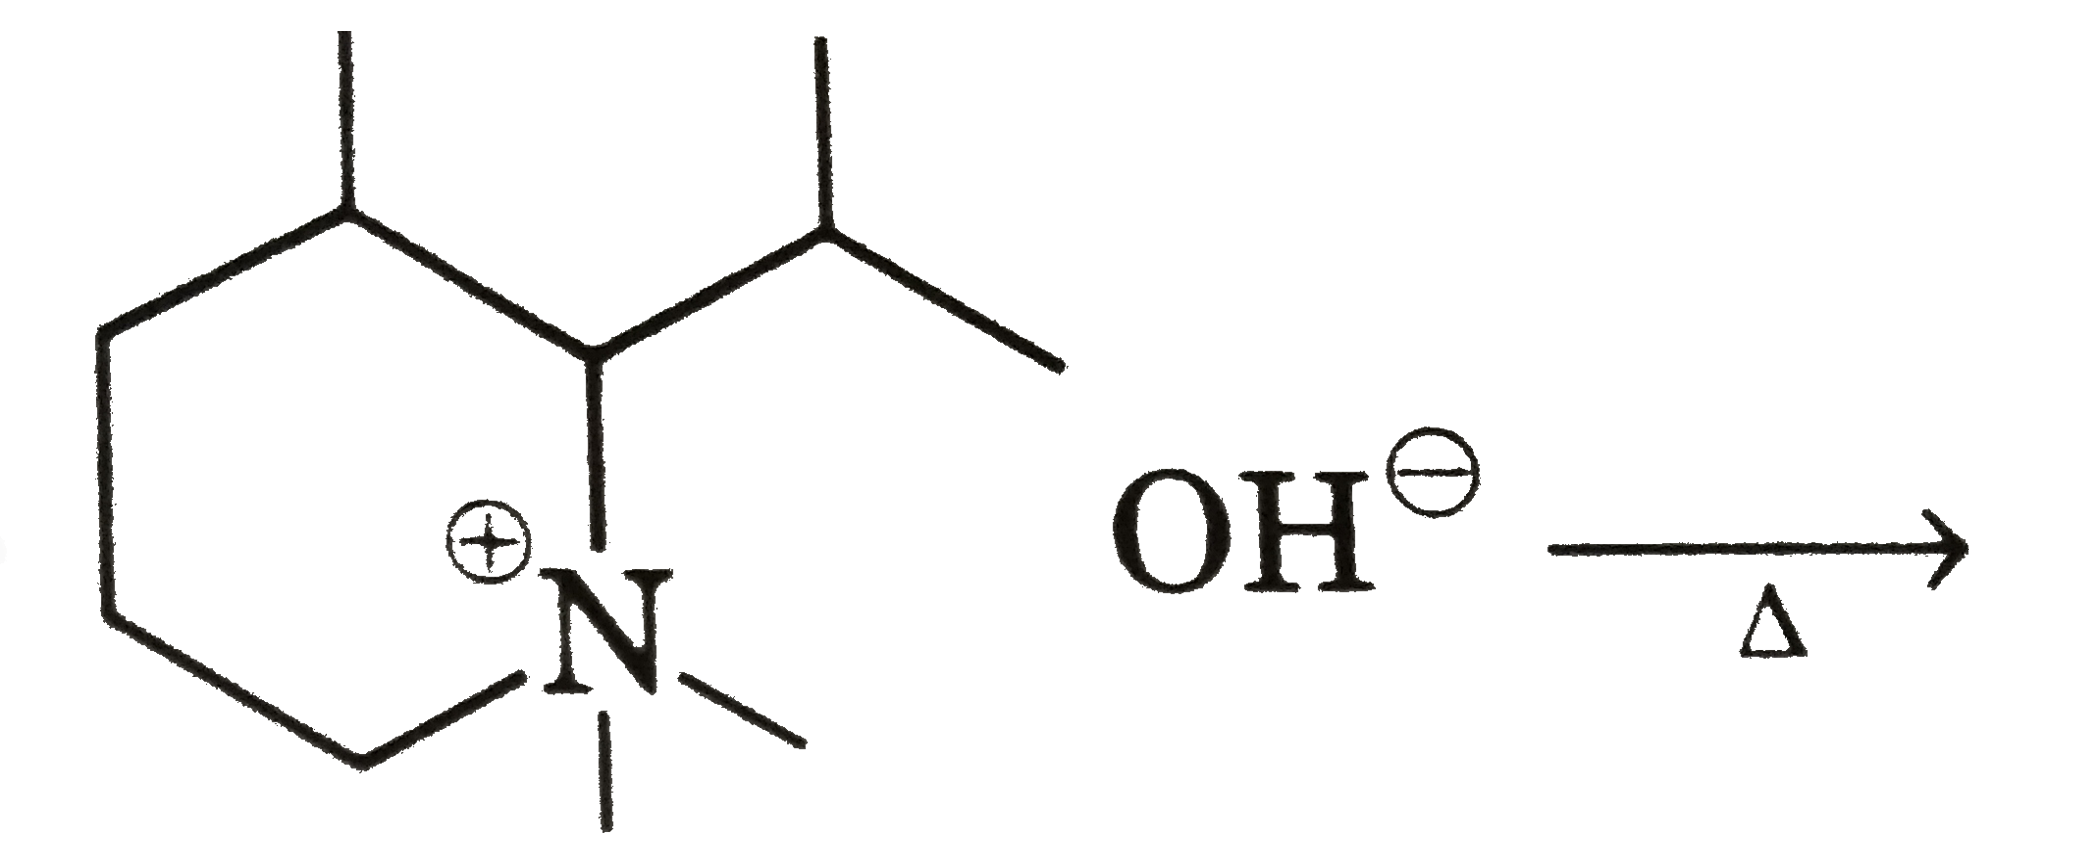 Number of alpha-H in alkene which is major product in this reaction is :